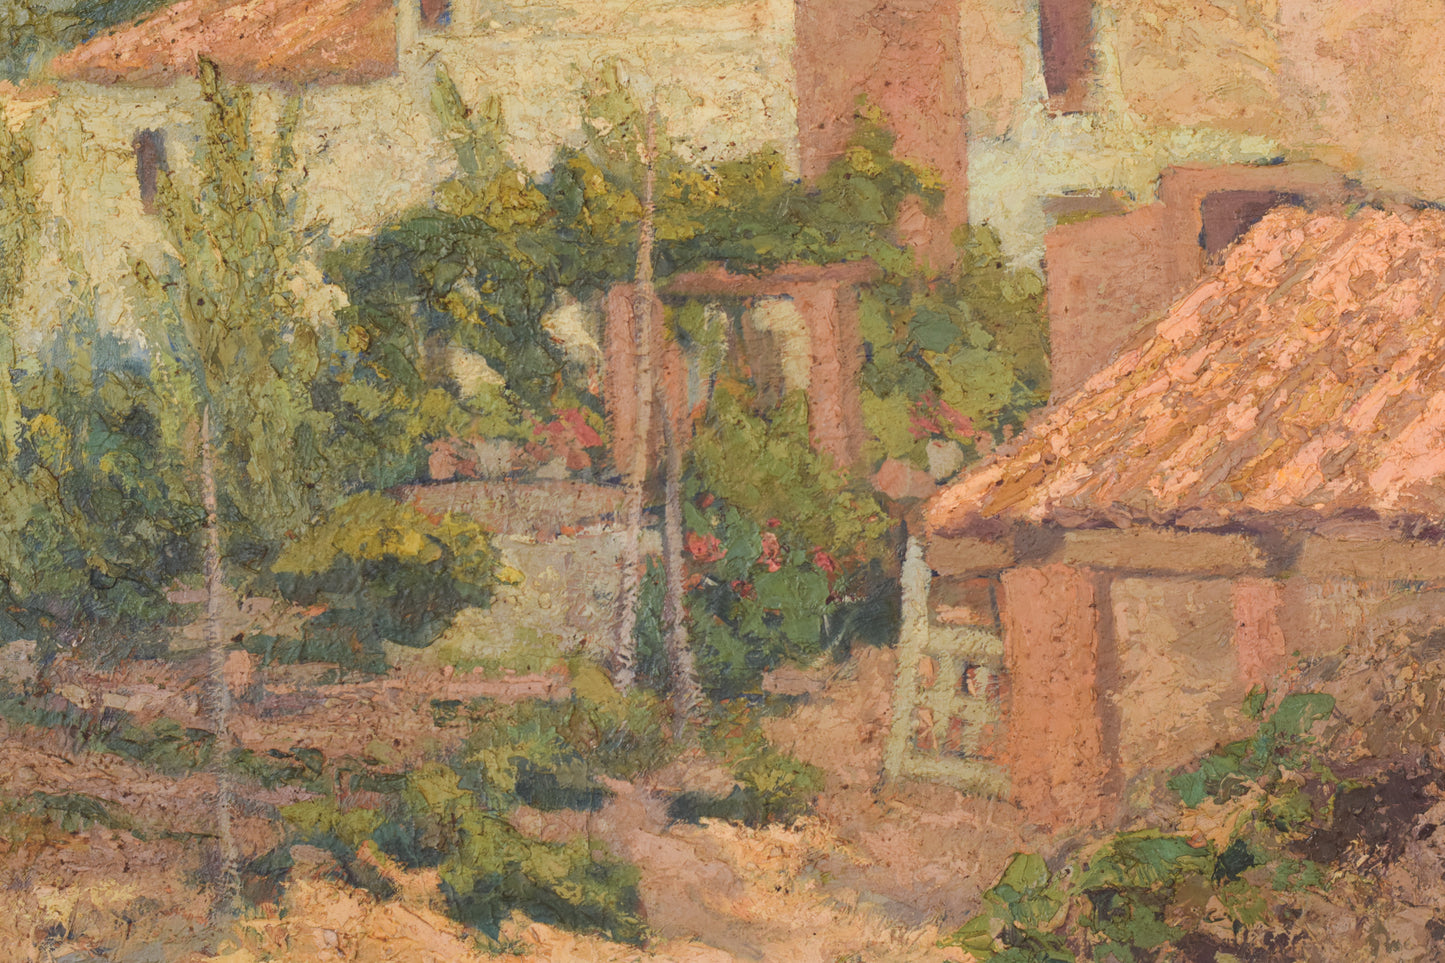 Impressionist Painting of Villas and Garden